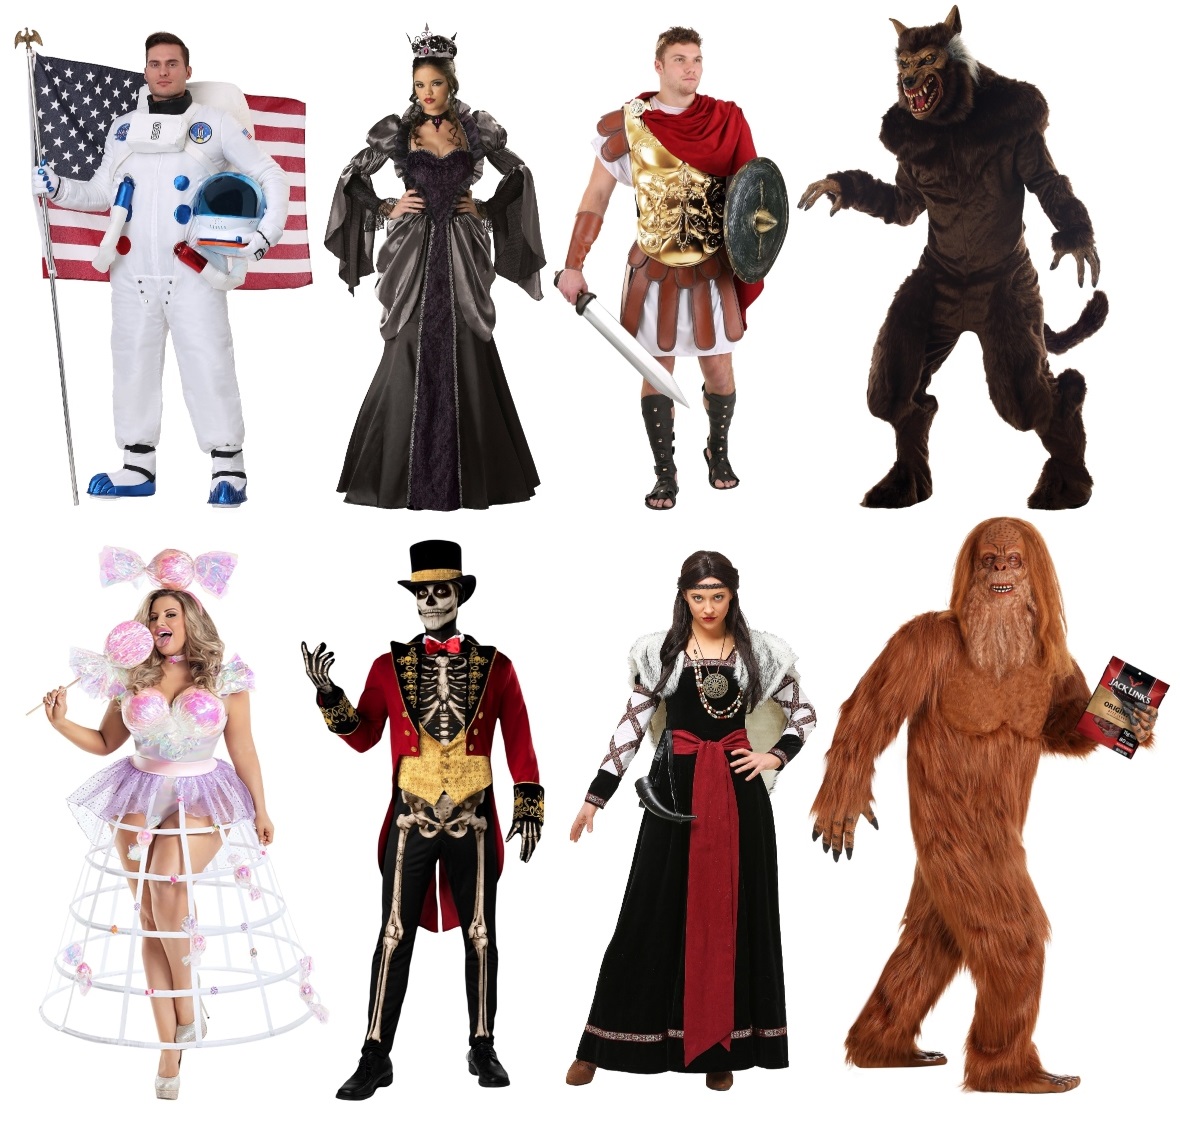 Authentic Cosplay Costume Ideas For Your Inner Geek [Costume Guide] - HalloweenCostumes.com Blog